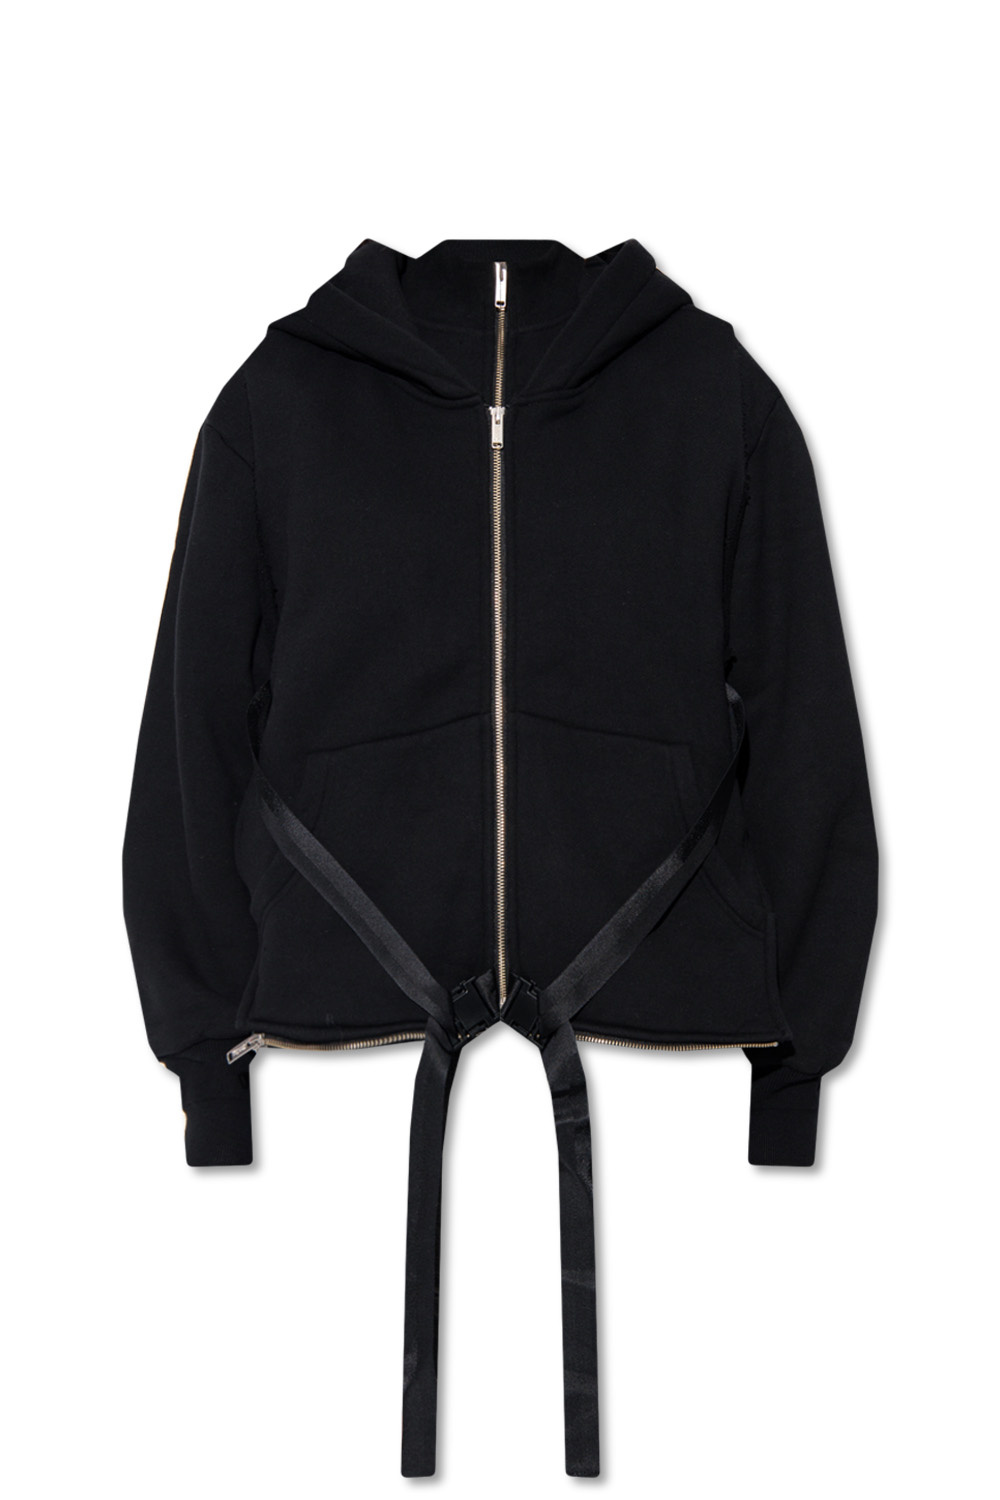 Undercover hoodie contrast with zippers